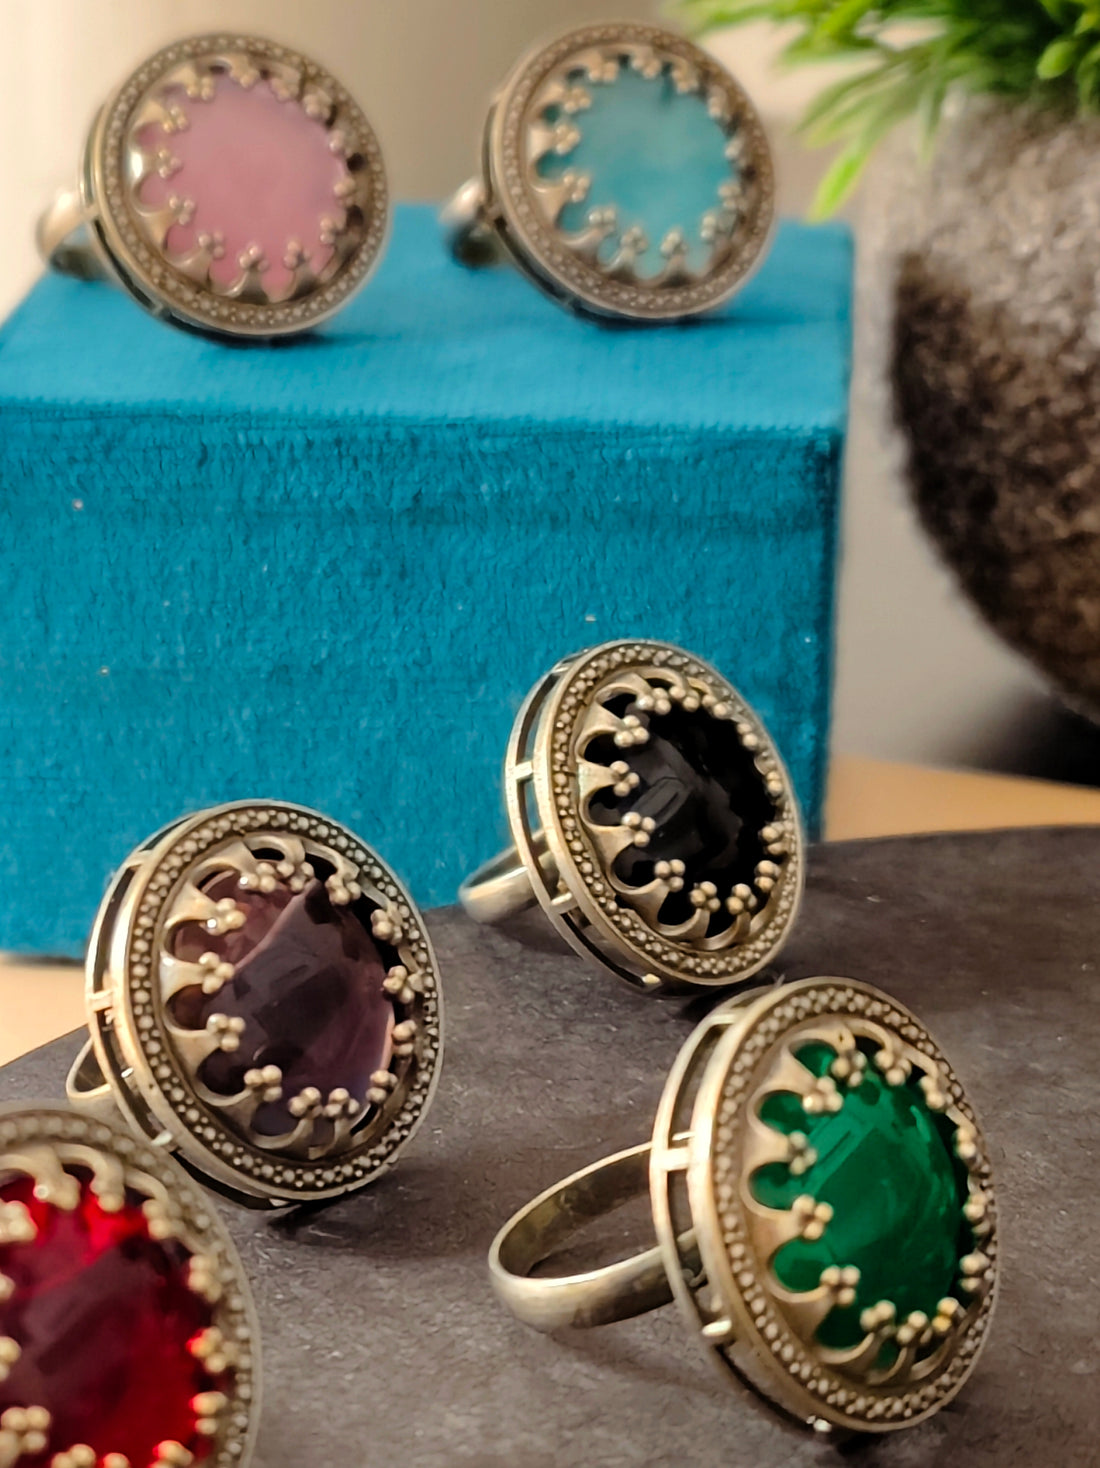 Aganya Multi Color Adjustable Rings with Antique Finish and Big Stone | Festive Occasions | for Traditional Look | for Office Indian Look- Green - Mrigaya India